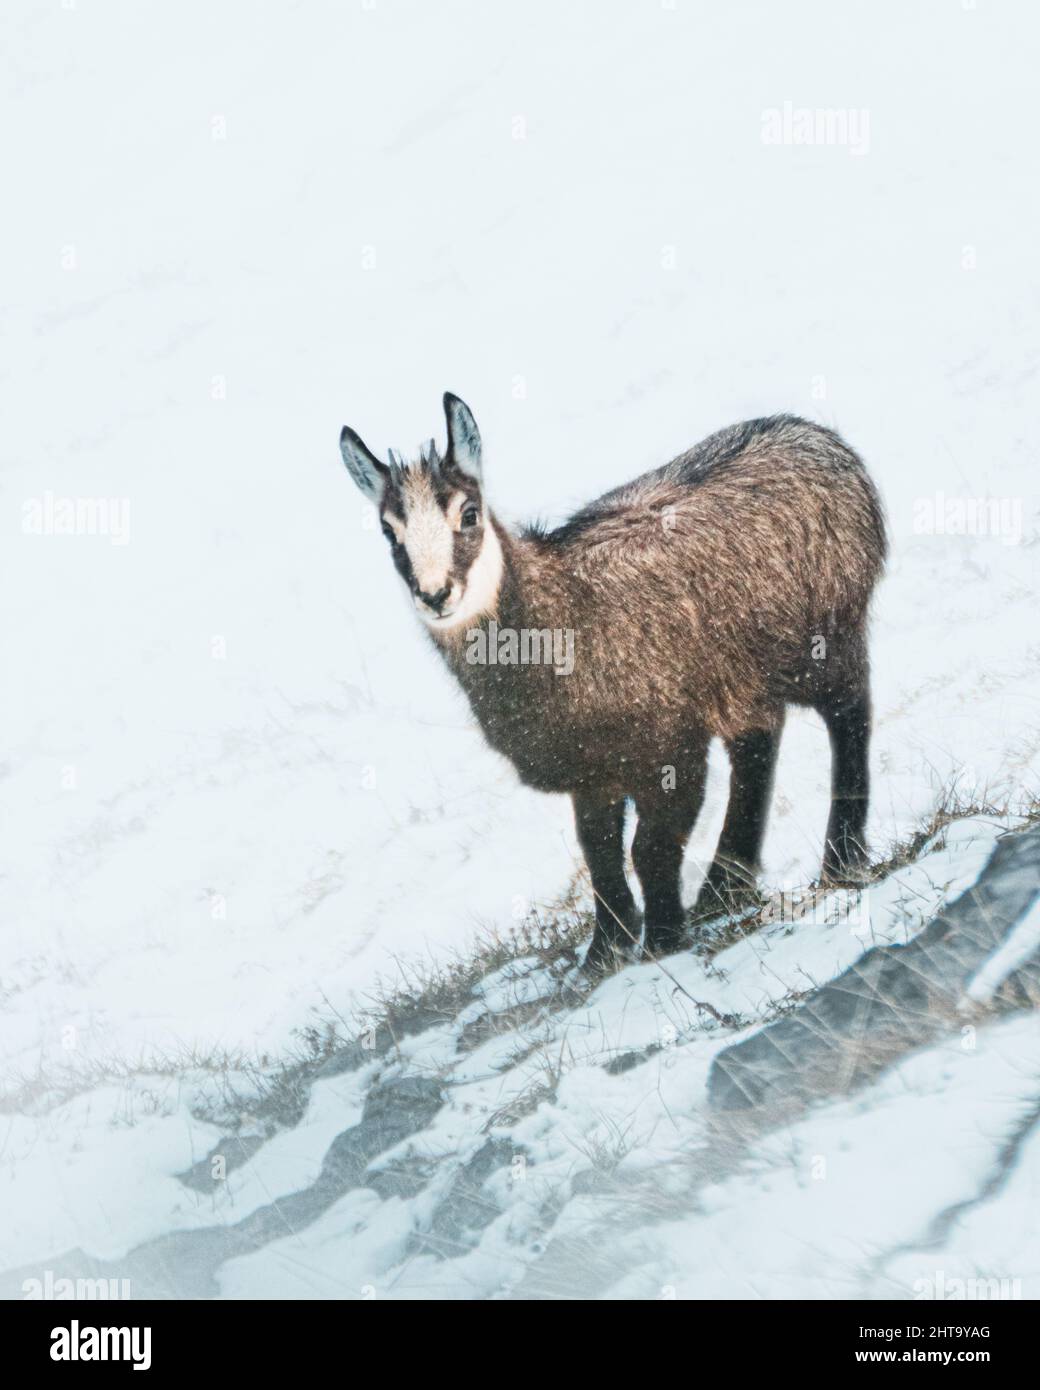 A vertical shot of the sheep standing on the snow Stock Photo